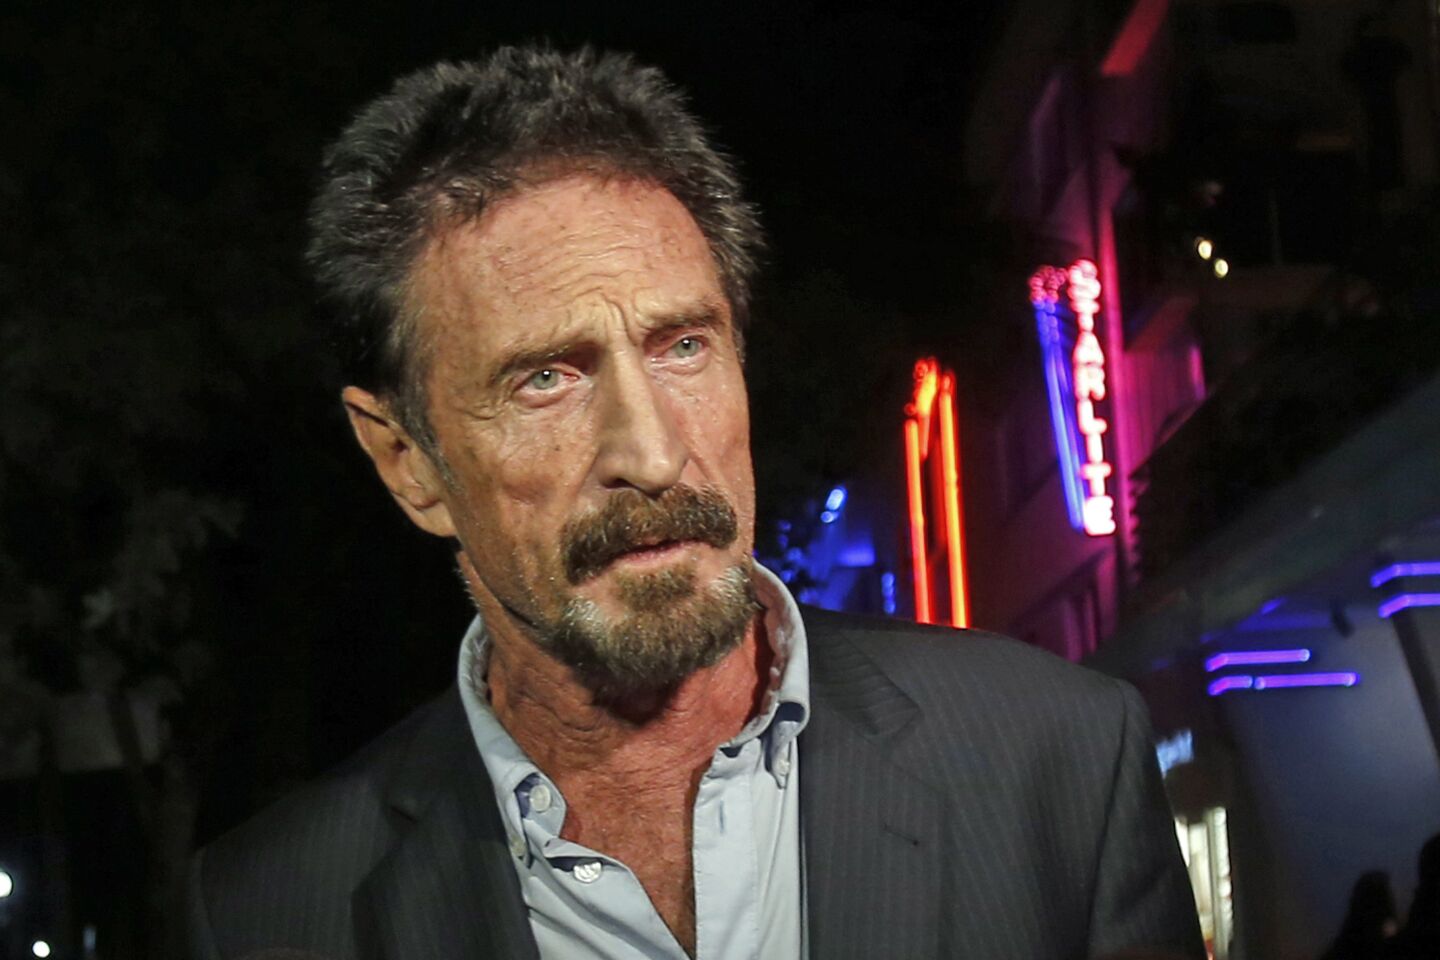 John McAfee, an antivirus software pioneer who became a frequent fugitive from the law, died in a prison cell in Spain hours after a court approved his extradition to the United States. He was 75.